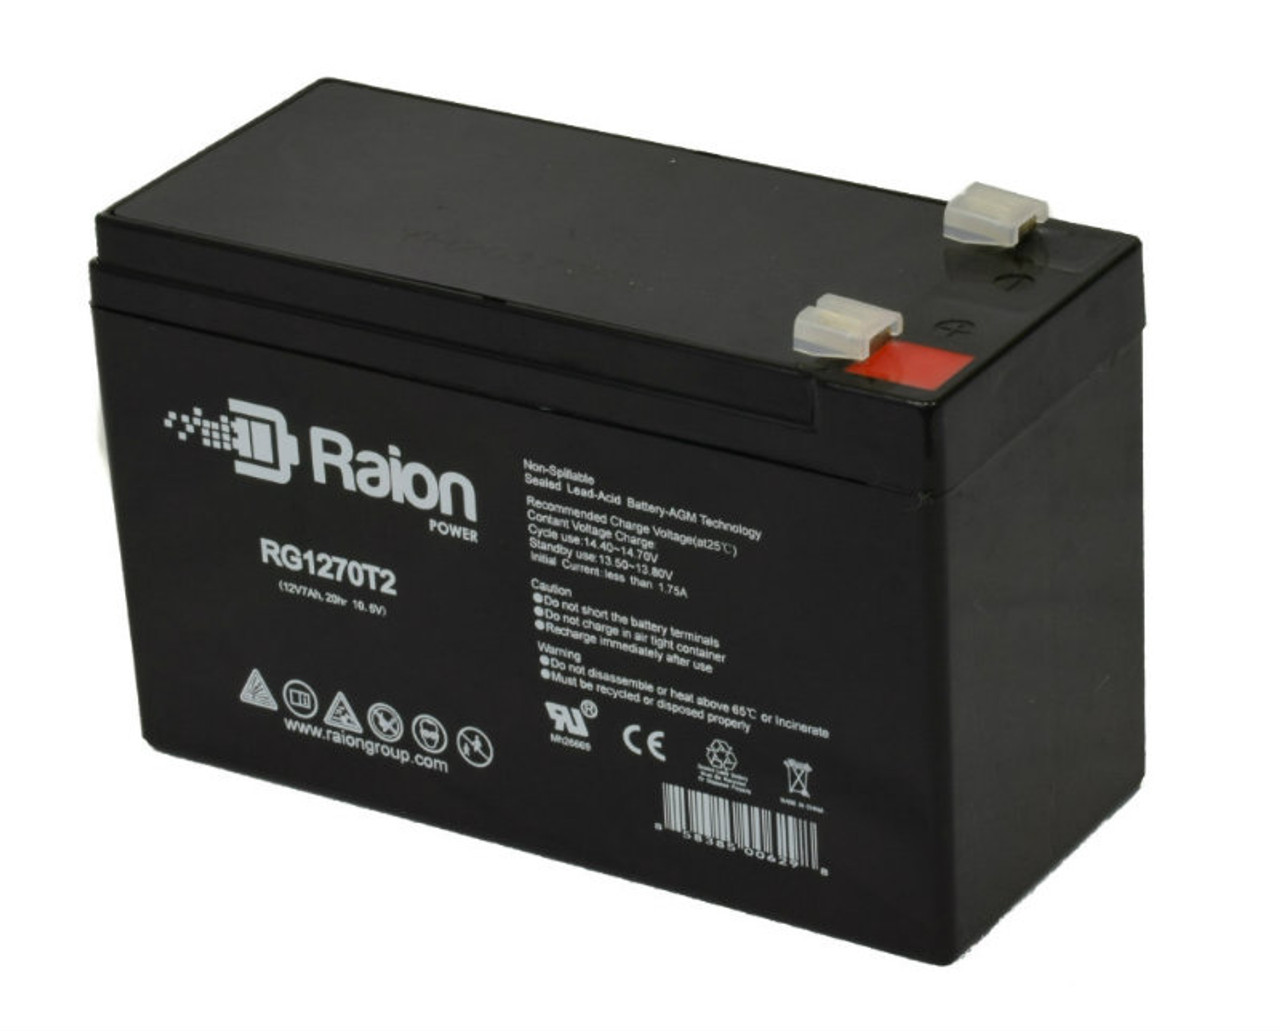 Raion Power RG1270T1 12V 7Ah Non-Spillable Replacement Battery for BB EVP7-12 F1